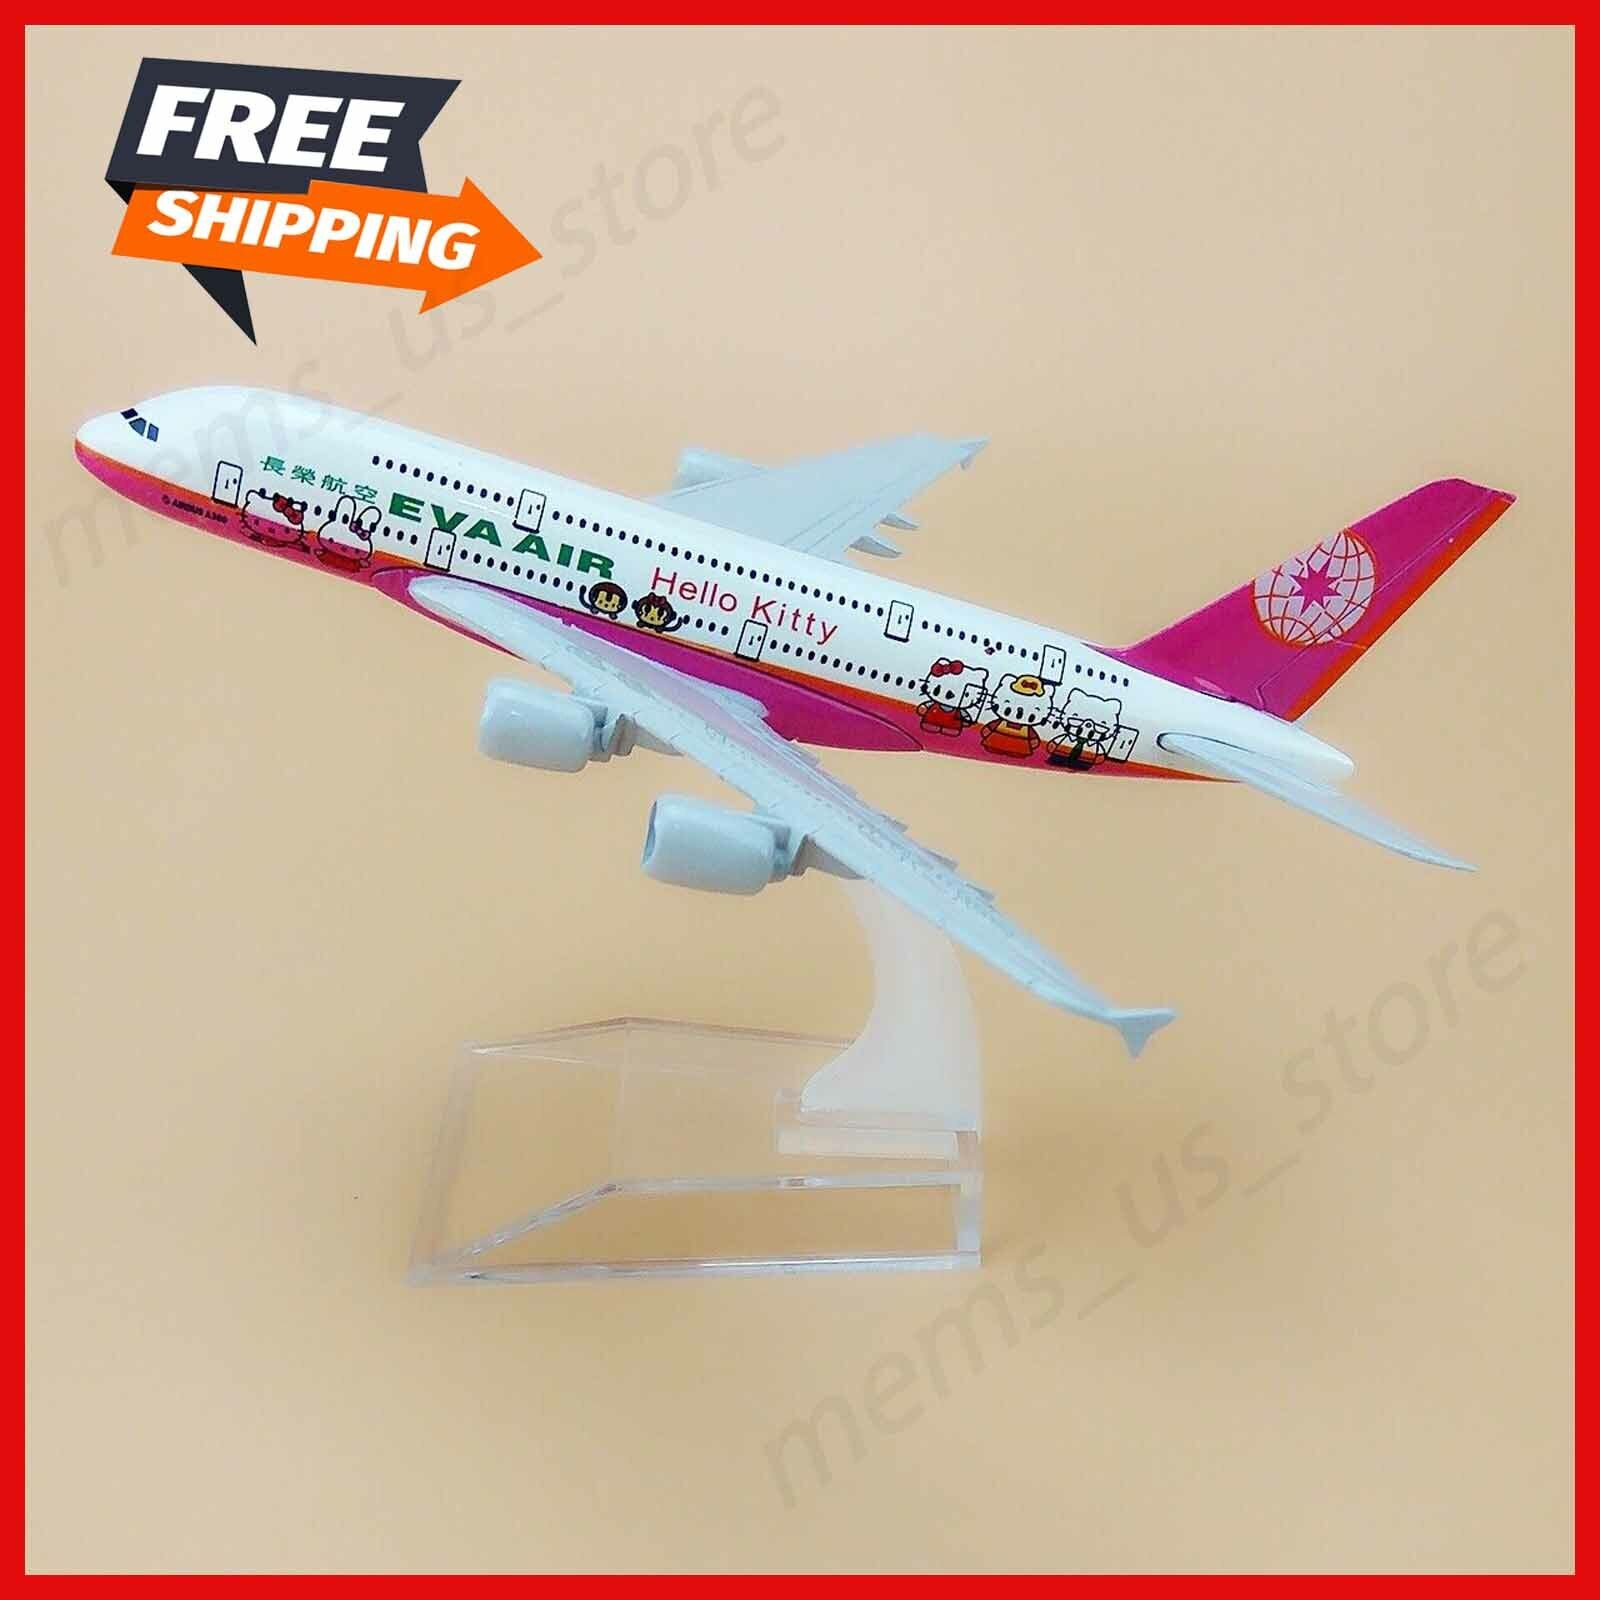 EVA Air Hello Kitty Airlines Airbus 380 A380 16cm Airplane Model Plane PINK